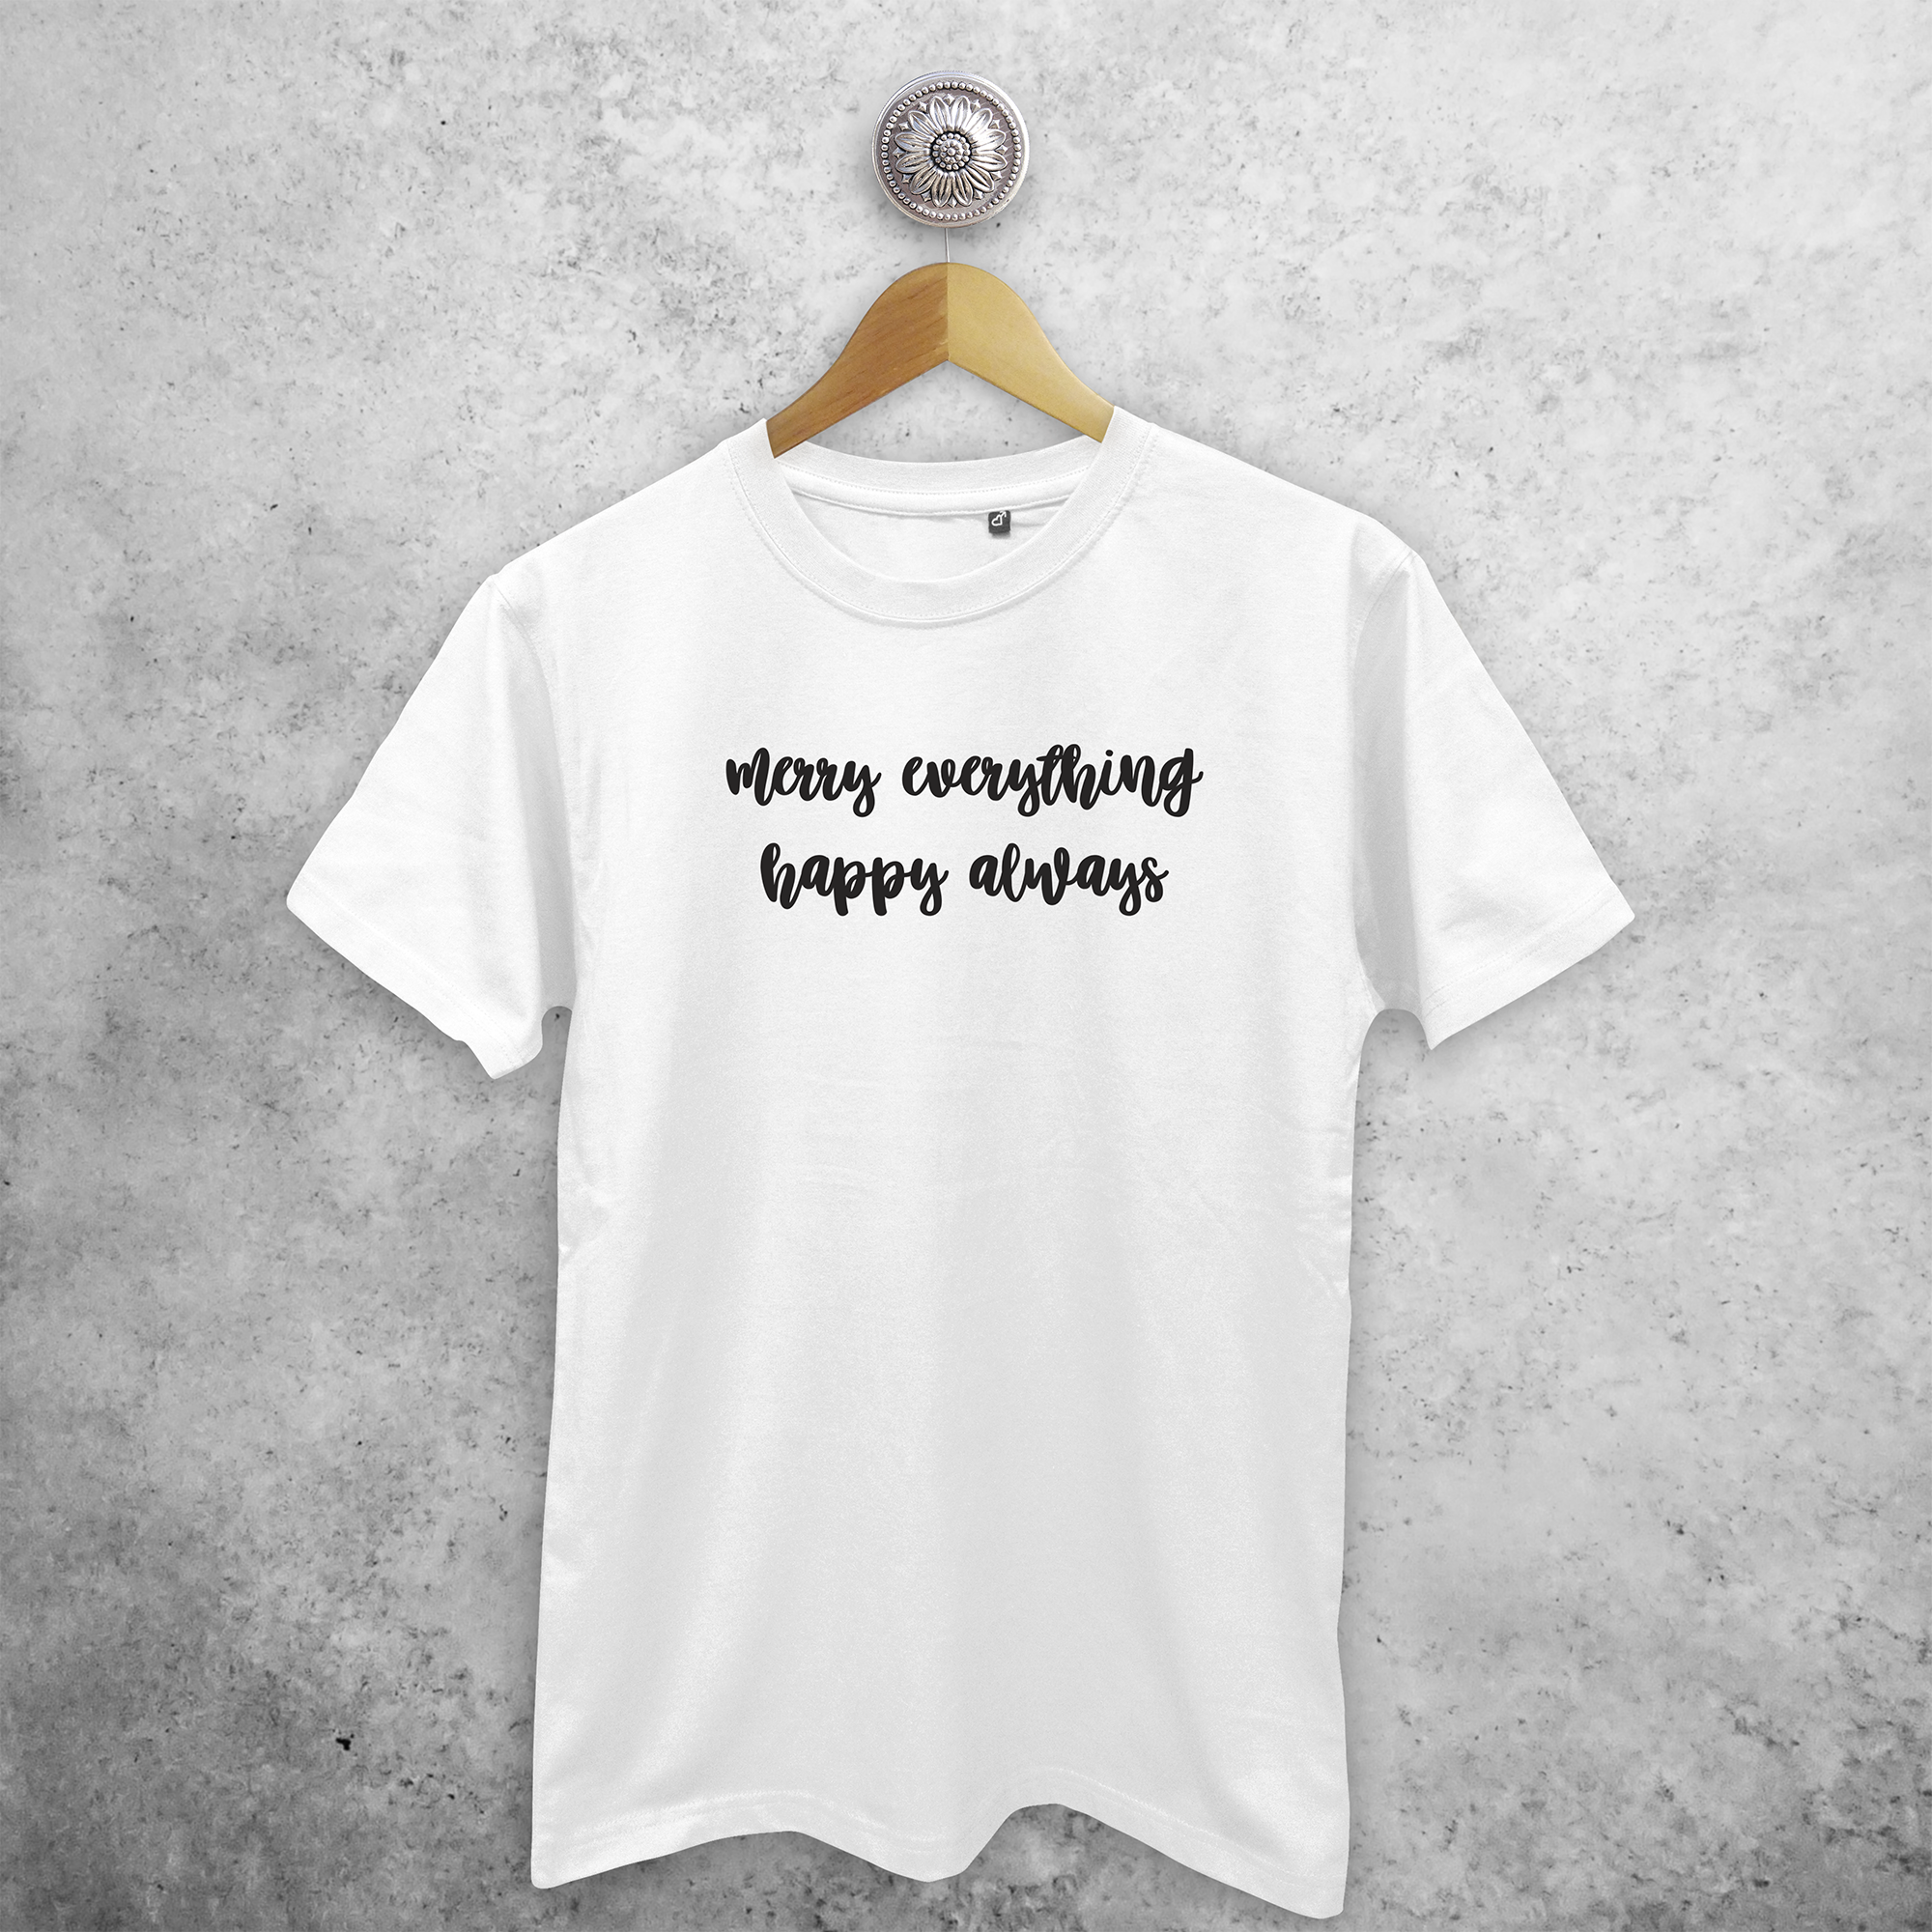 'Merry everything, Happy always' adult shirt